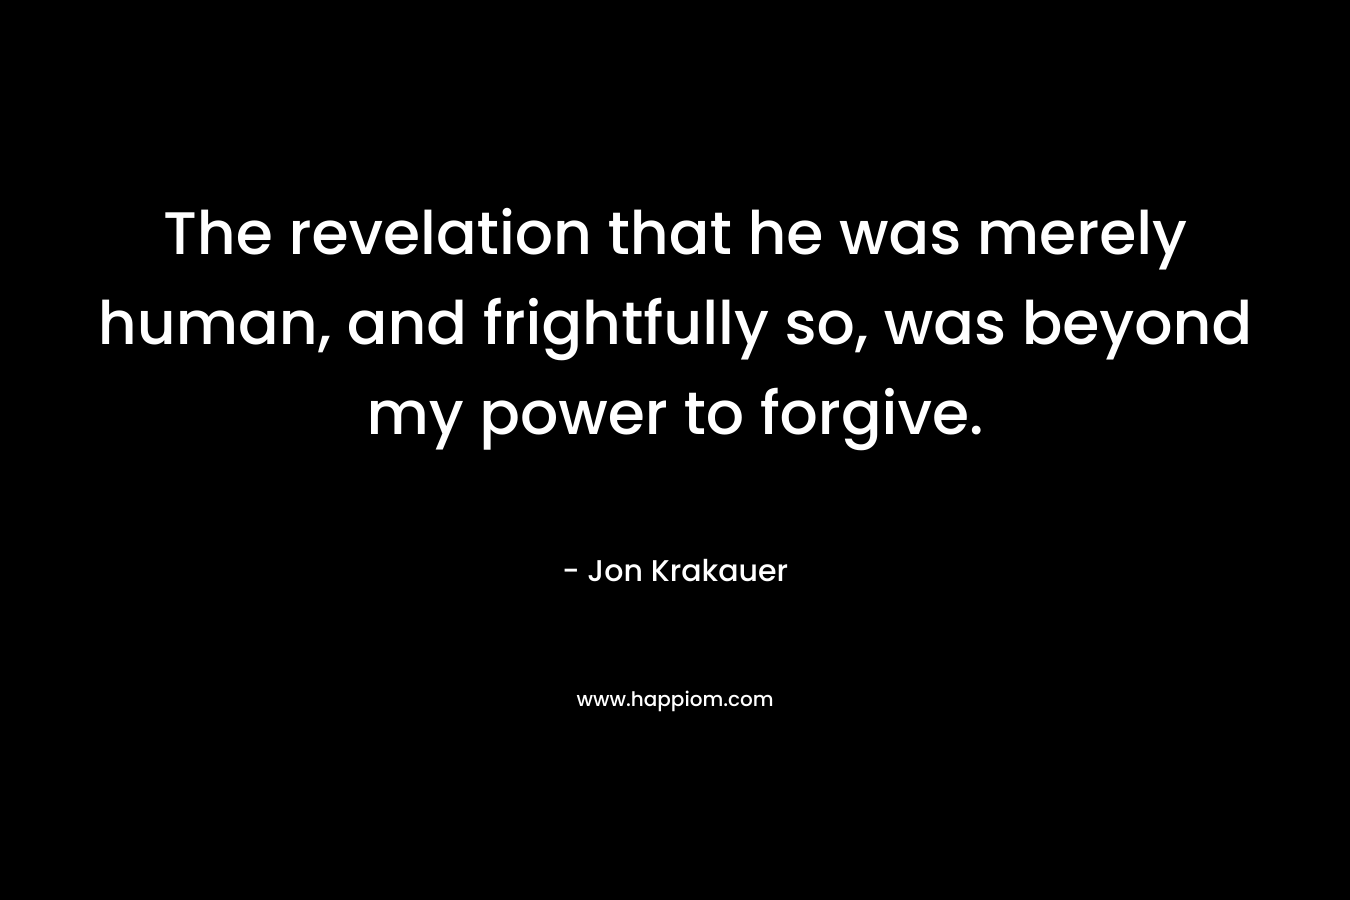 The revelation that he was merely human, and frightfully so, was beyond my power to forgive.